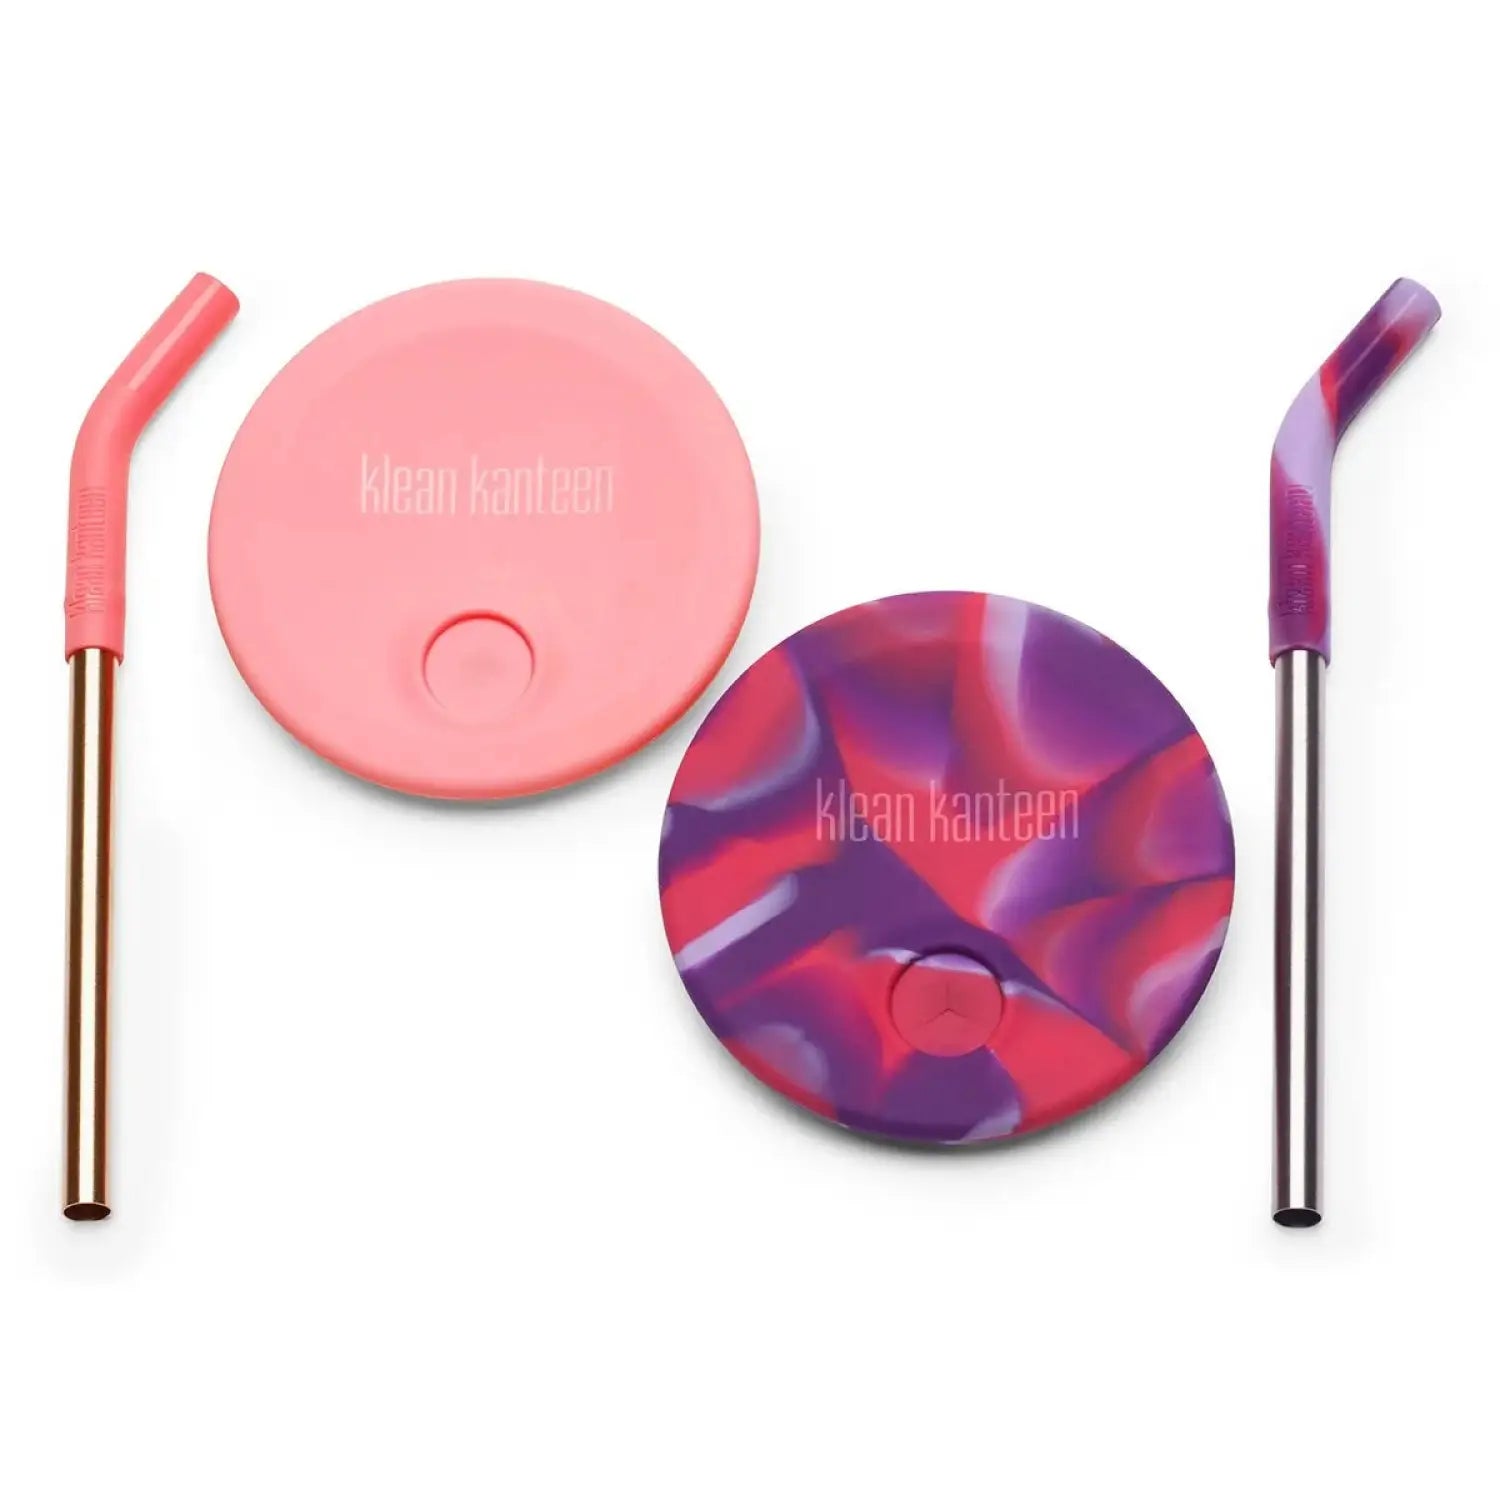 Klean Kanteen Kid's Cup Straw Lid 2-Pack shown in pink and pink and purple tie-dye with reusable stainless steel straws.